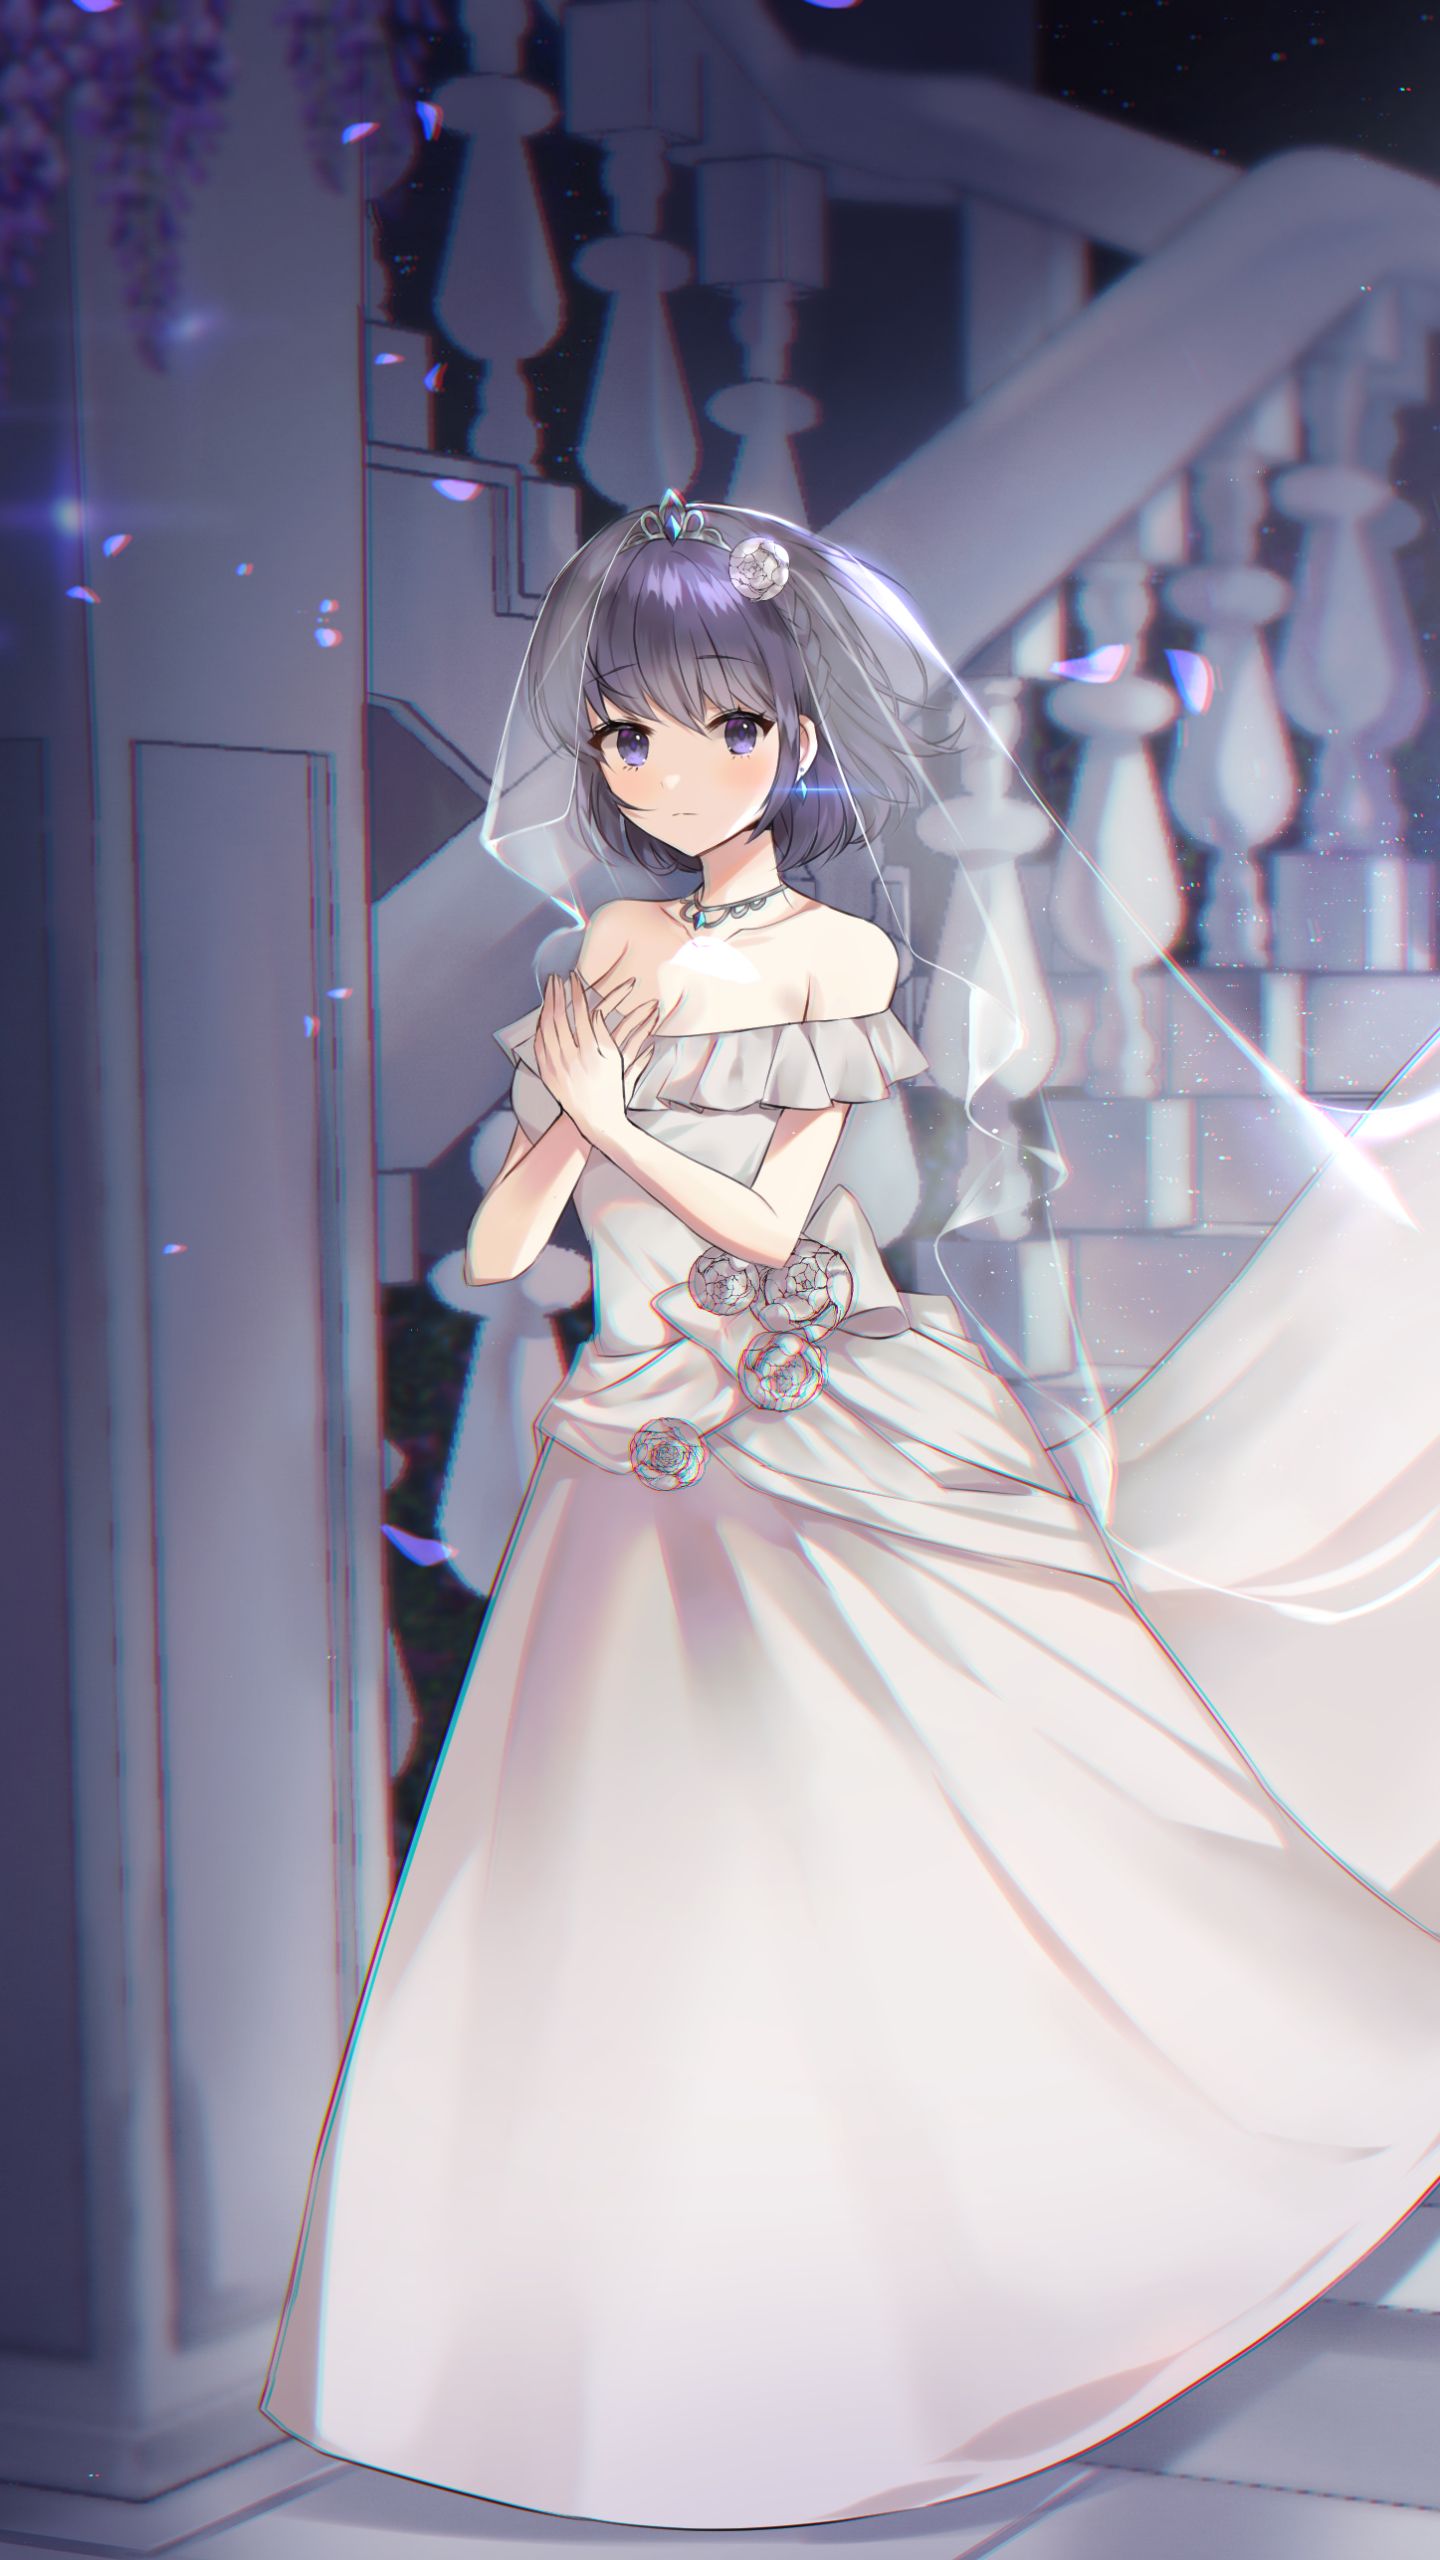 An Anime Photo With A Bride Walking Down Aisle With Flowers Background,  Funny Funeral Picture Background Image And Wallpaper for Free Download